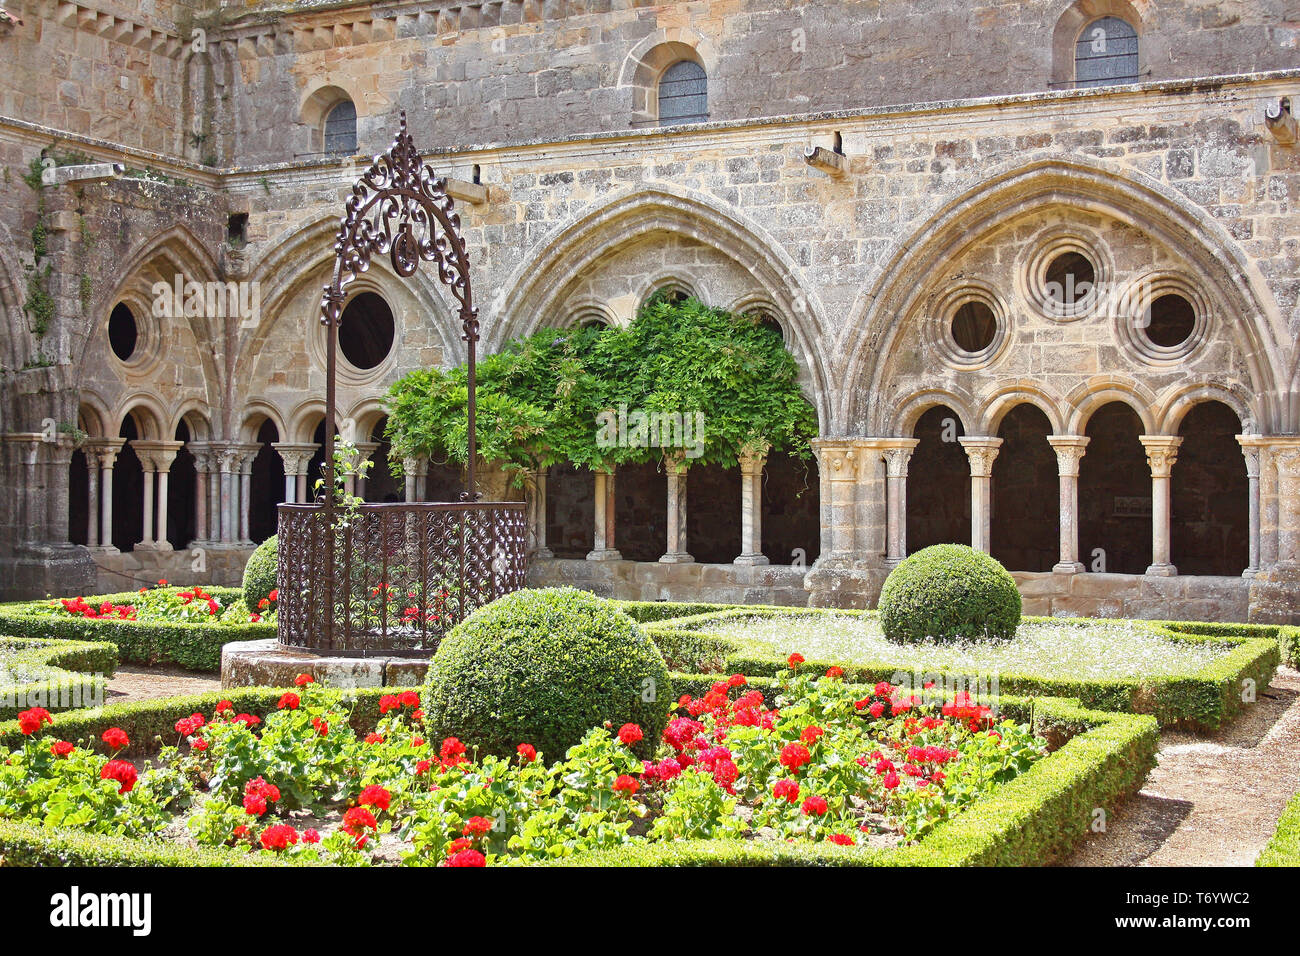 Abbey Fontfroide, Narbonne, France Stock Photo